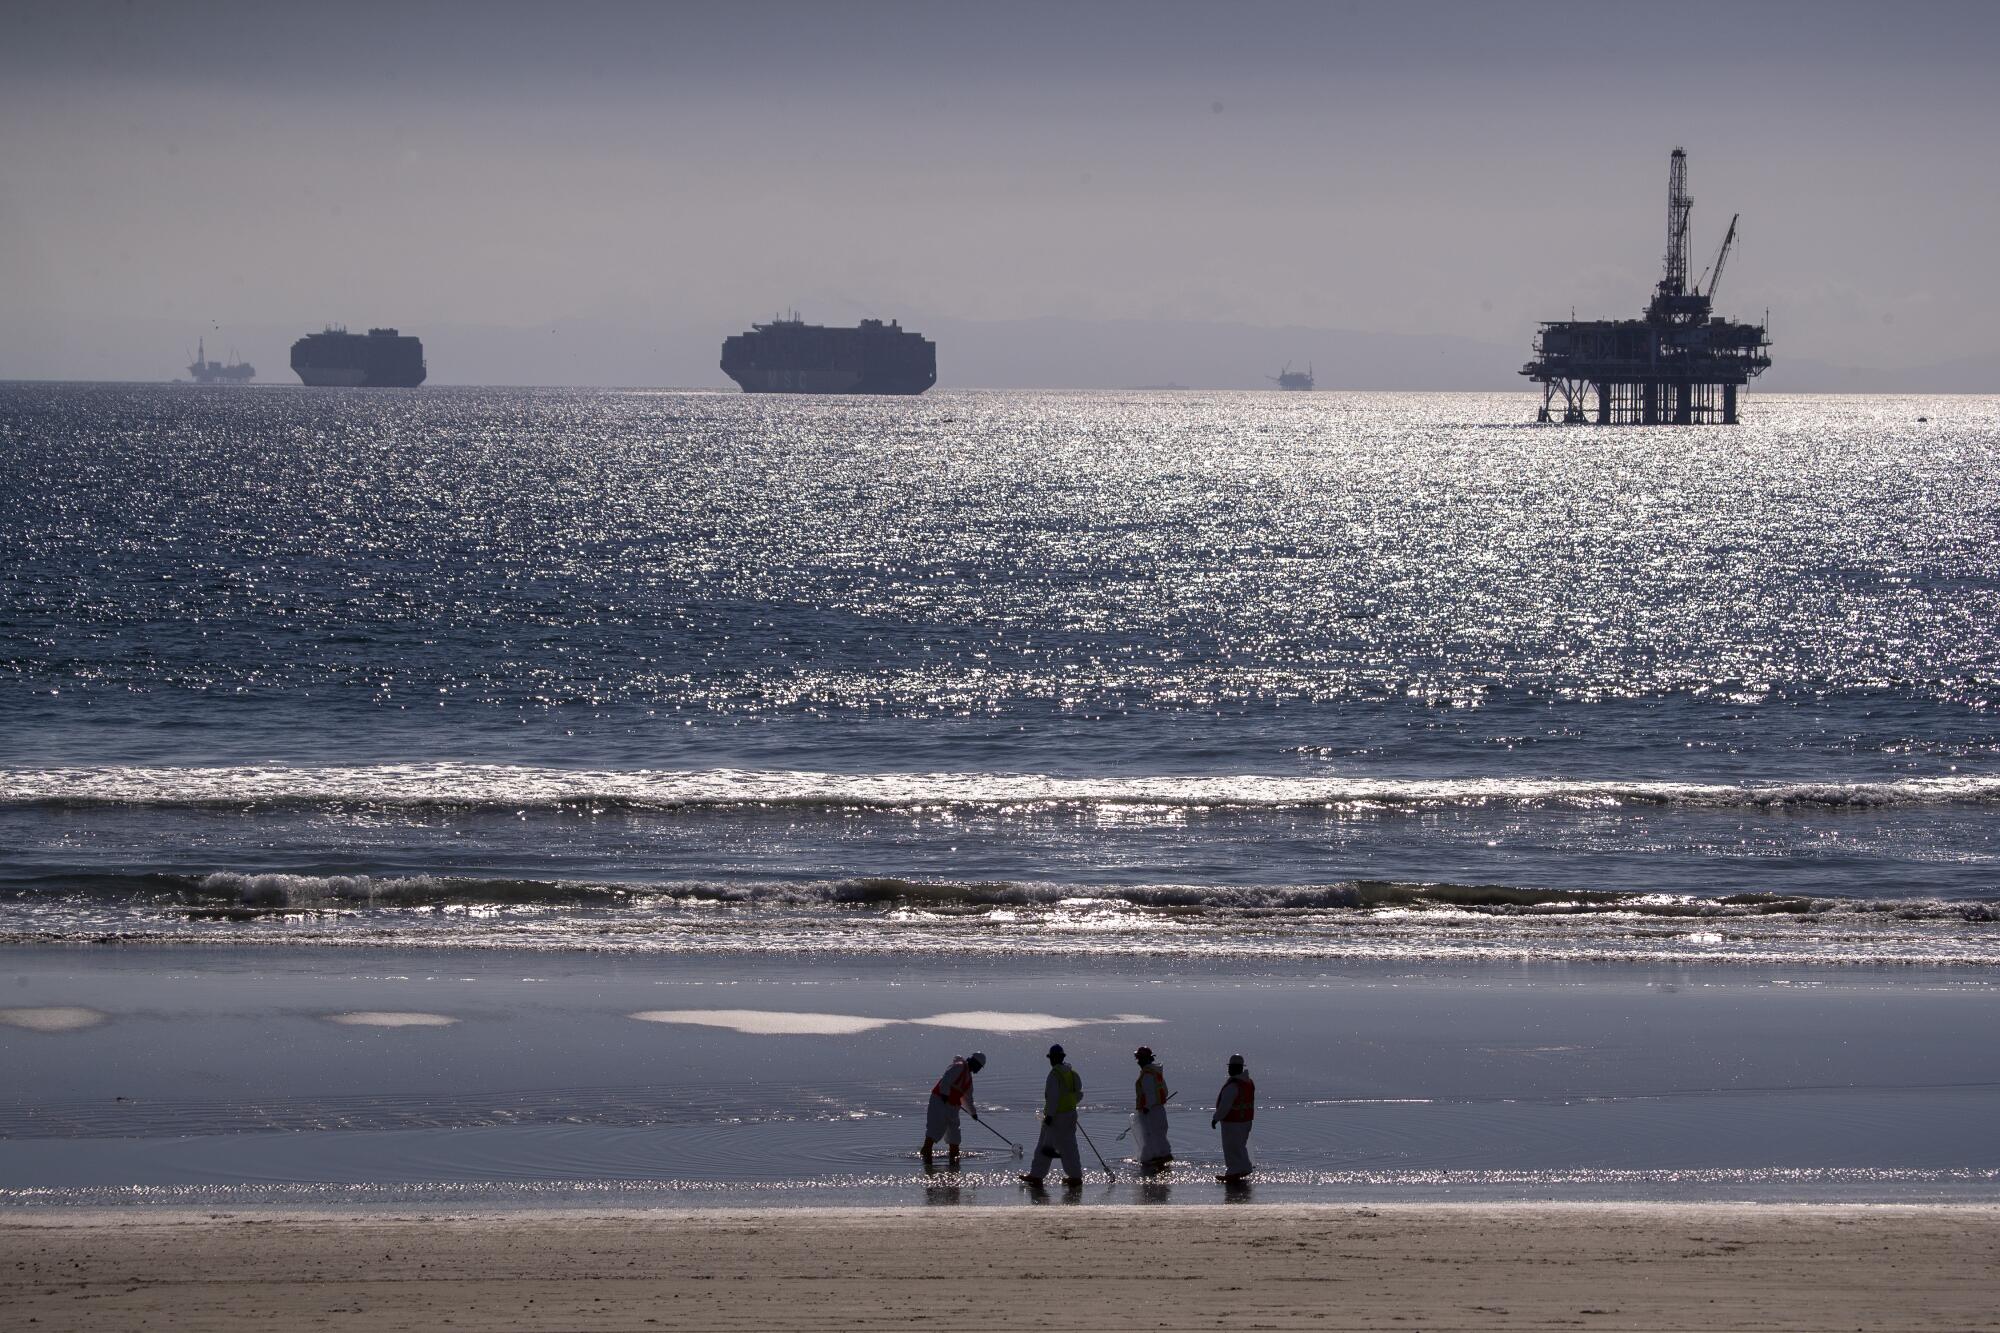 Container ships and an oil derrick line the horizon as oil spill cleanup crews work along the beach.